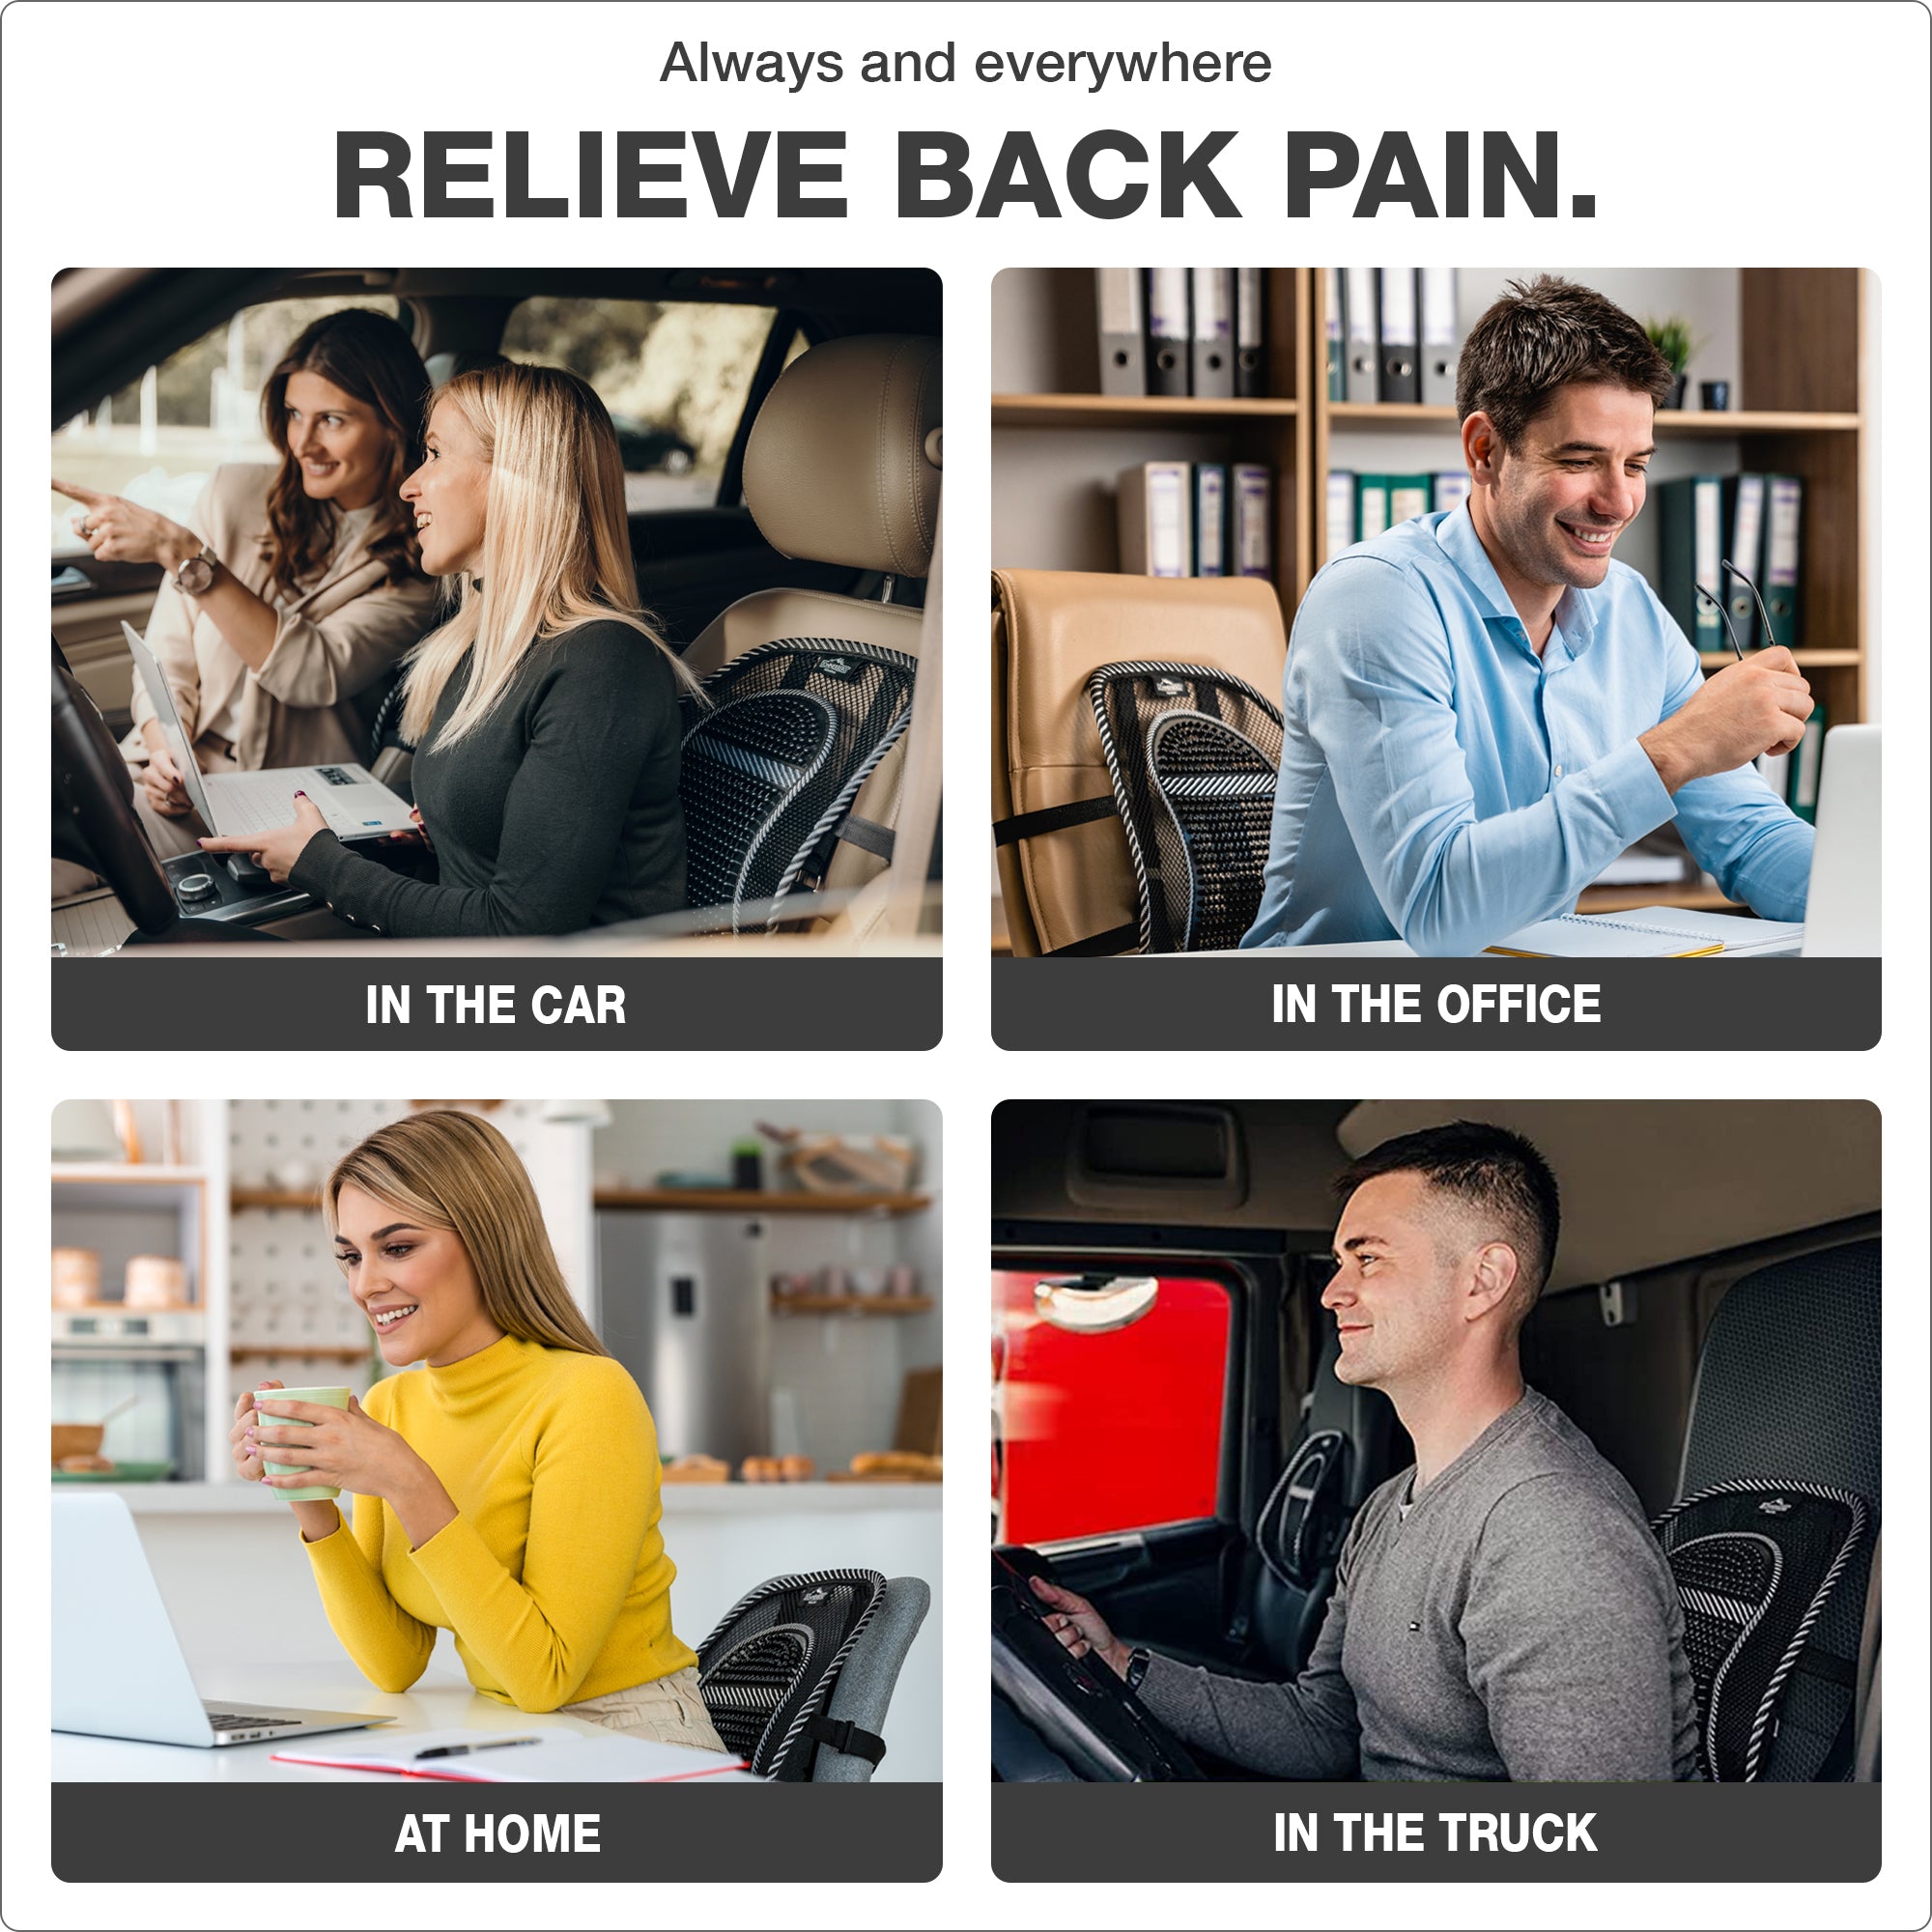 9 Criss Cross Chairs That Will Take Away Your Back Pain – topsfordays